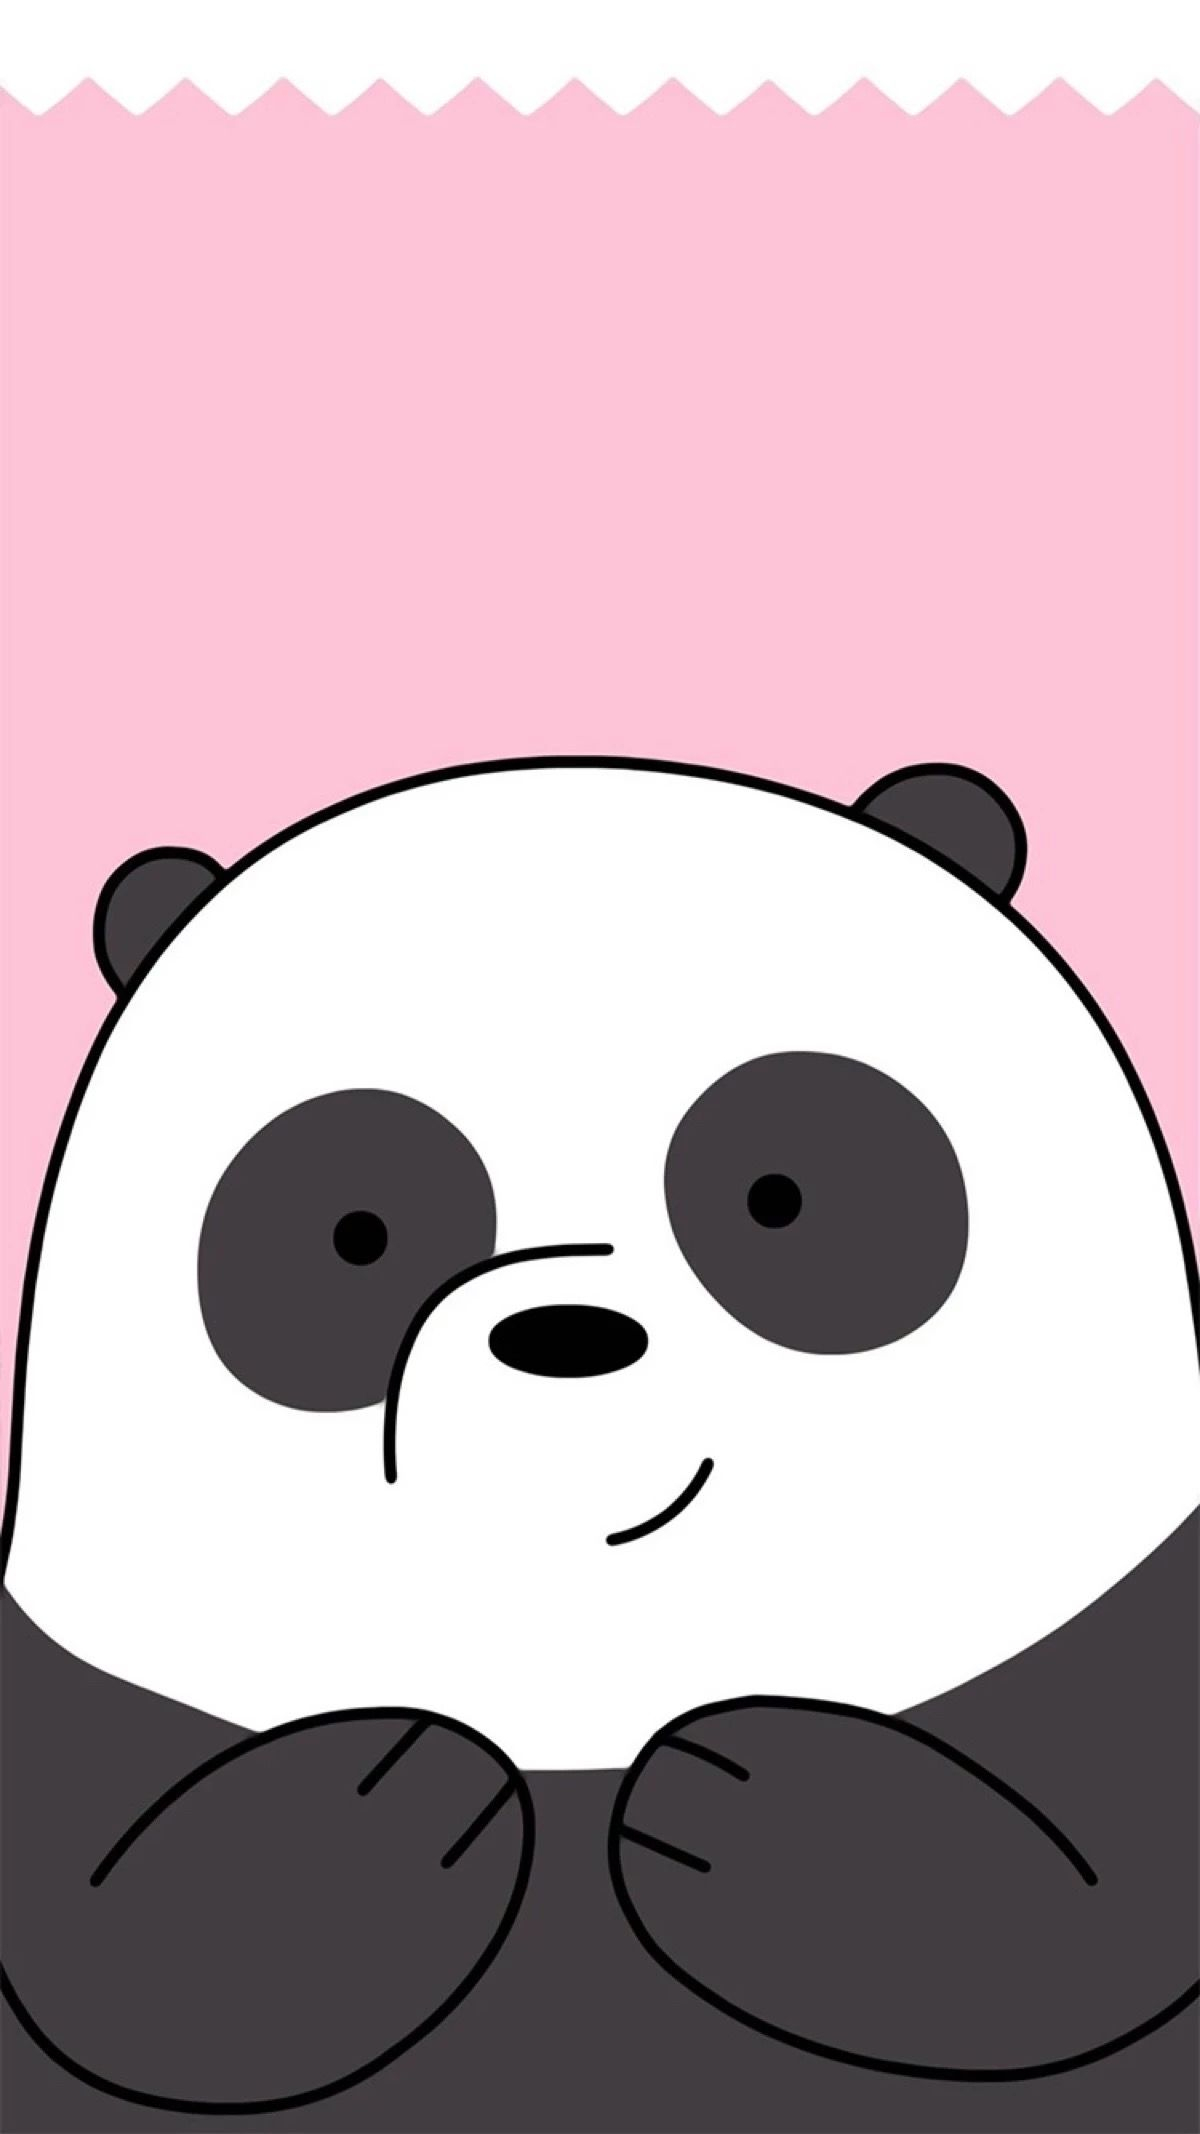 1200x2134 Pin by Pankeaw&agrave;&cedil;&#155;&agrave;&sup1;&#136;&agrave;&cedil;&sup2;&agrave;&cedil;&#153;&agrave;&sup1;&#129;&agrave;&cedil;&#129;&agrave;&sup1;&#137;&agrave;&cedil;&sect; on Cute Cartoon | We bare bears wallpapers, Bear wallpaper, Cute wallpapers